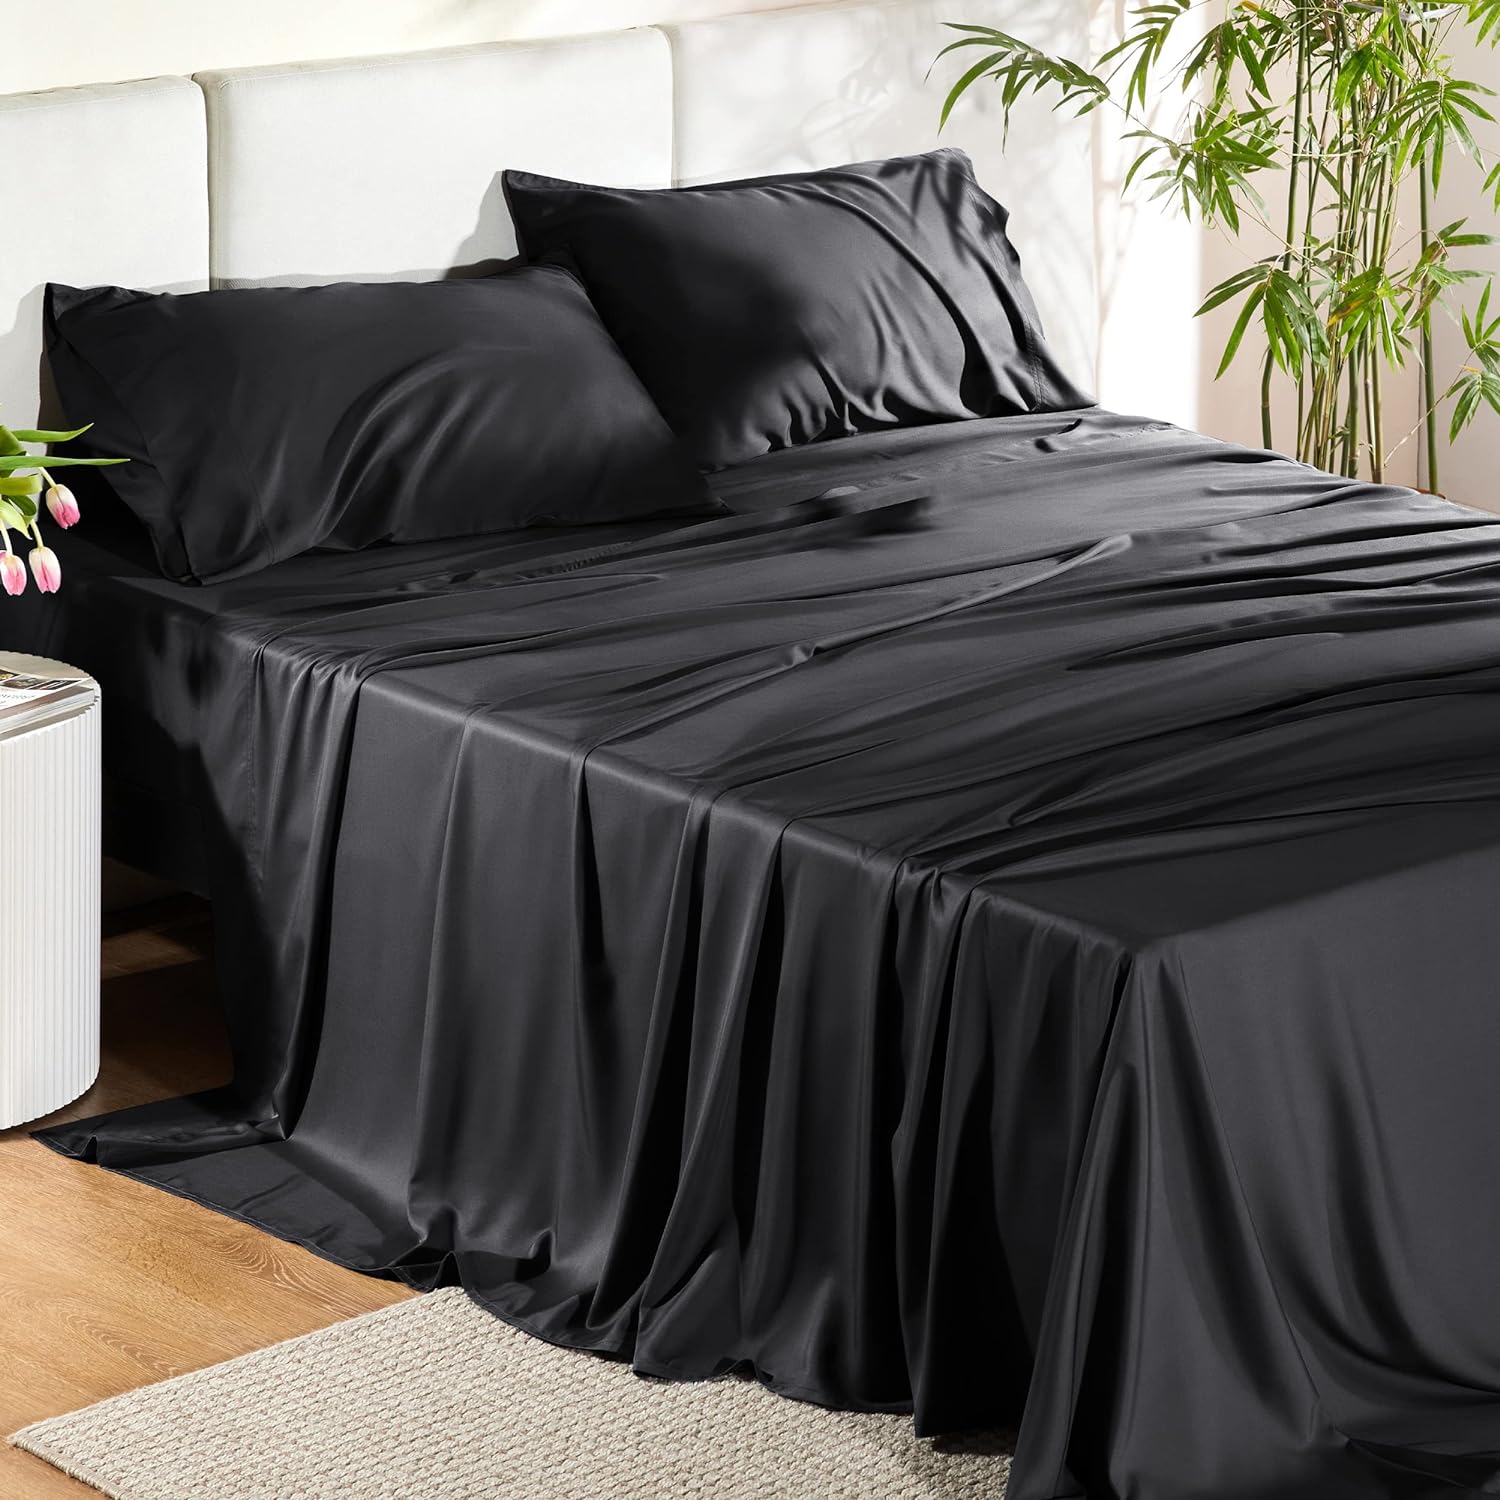 Bedsure Queen Sheets, Rayon Derived from Bamboo, Queen Cooling Sheet Set, Deep Pocket Up to 16, Breathable & Soft Bed Sheets, Hotel Luxury Silky Bedding Sheets & Pillowcases, Black